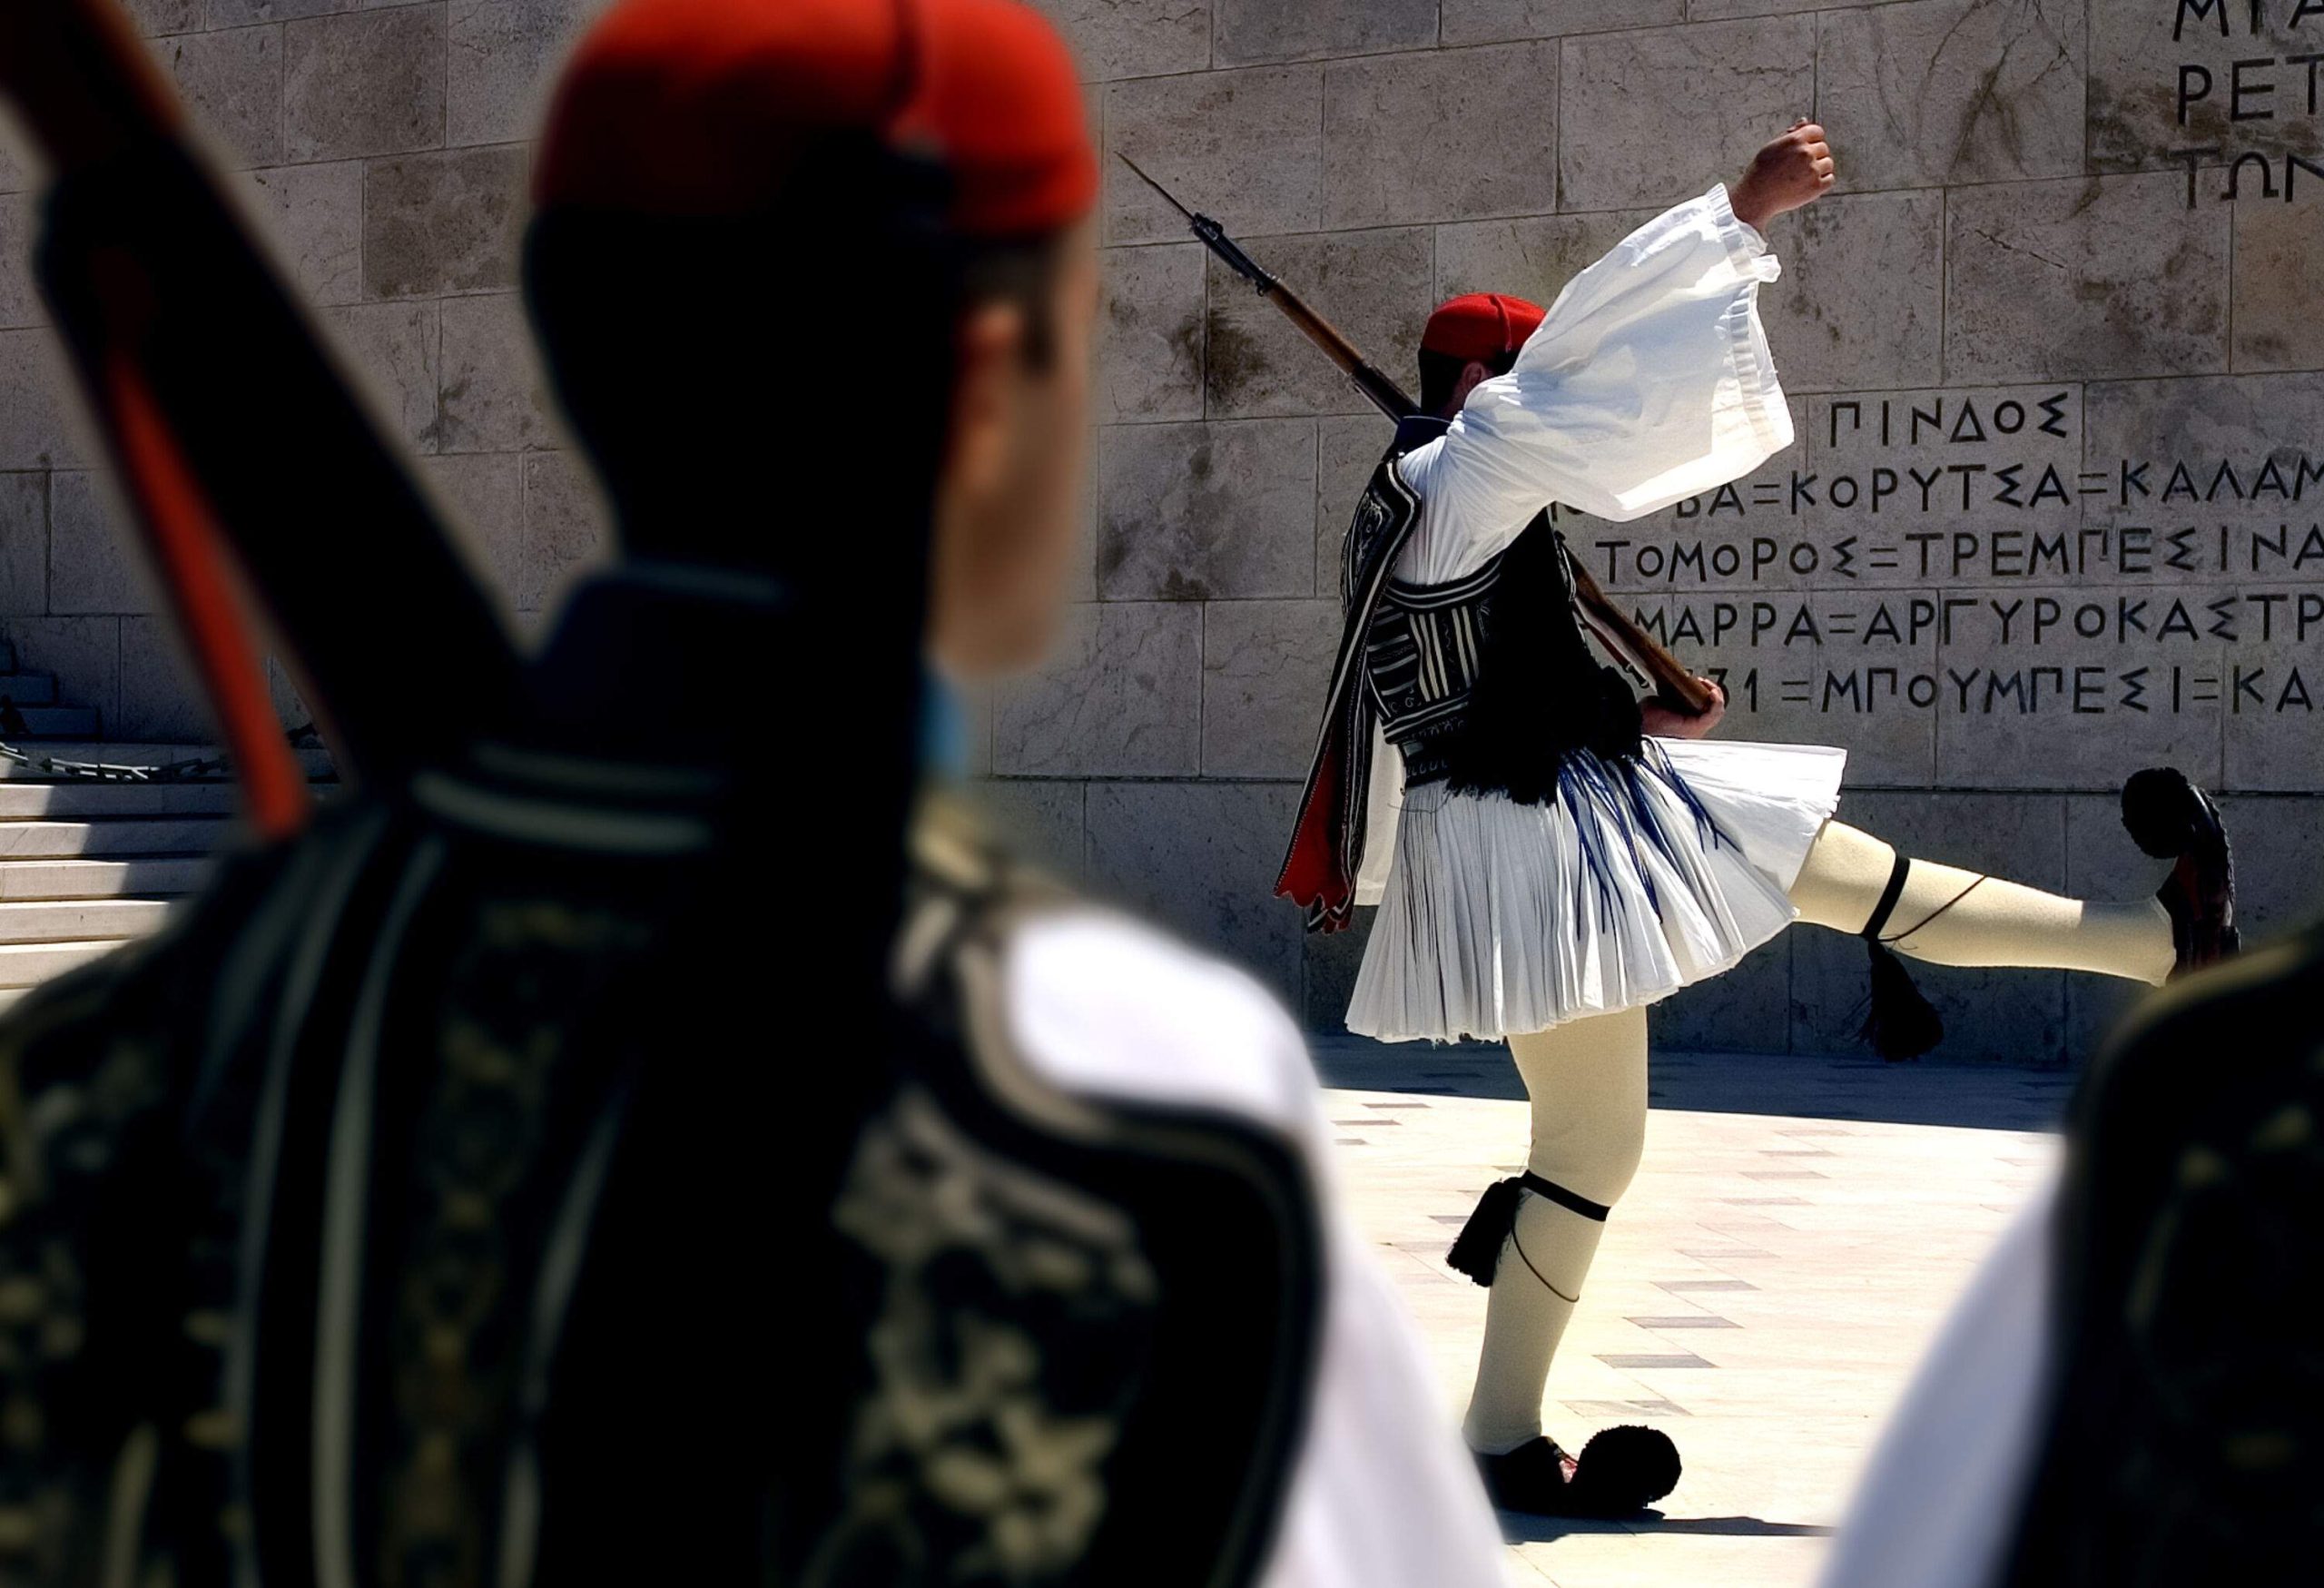 An elite Greek soldier in a traditional Evzones uniform raised his right arm and left leg simultaneously while holding a weapon on his left shoulder.